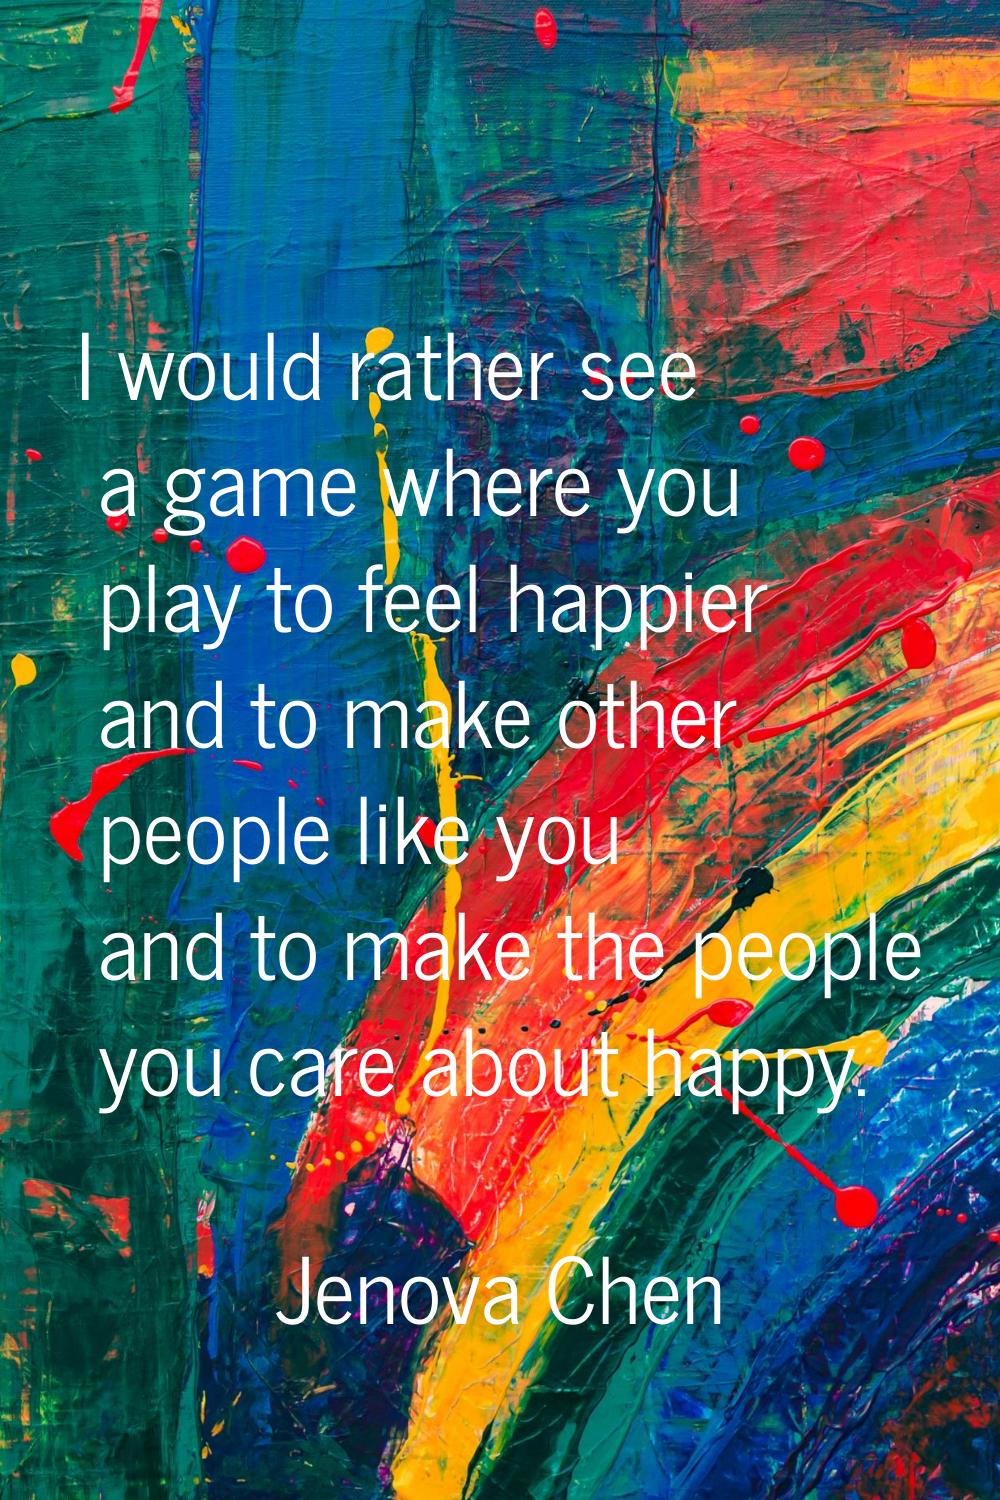 I would rather see a game where you play to feel happier and to make other people like you and to m